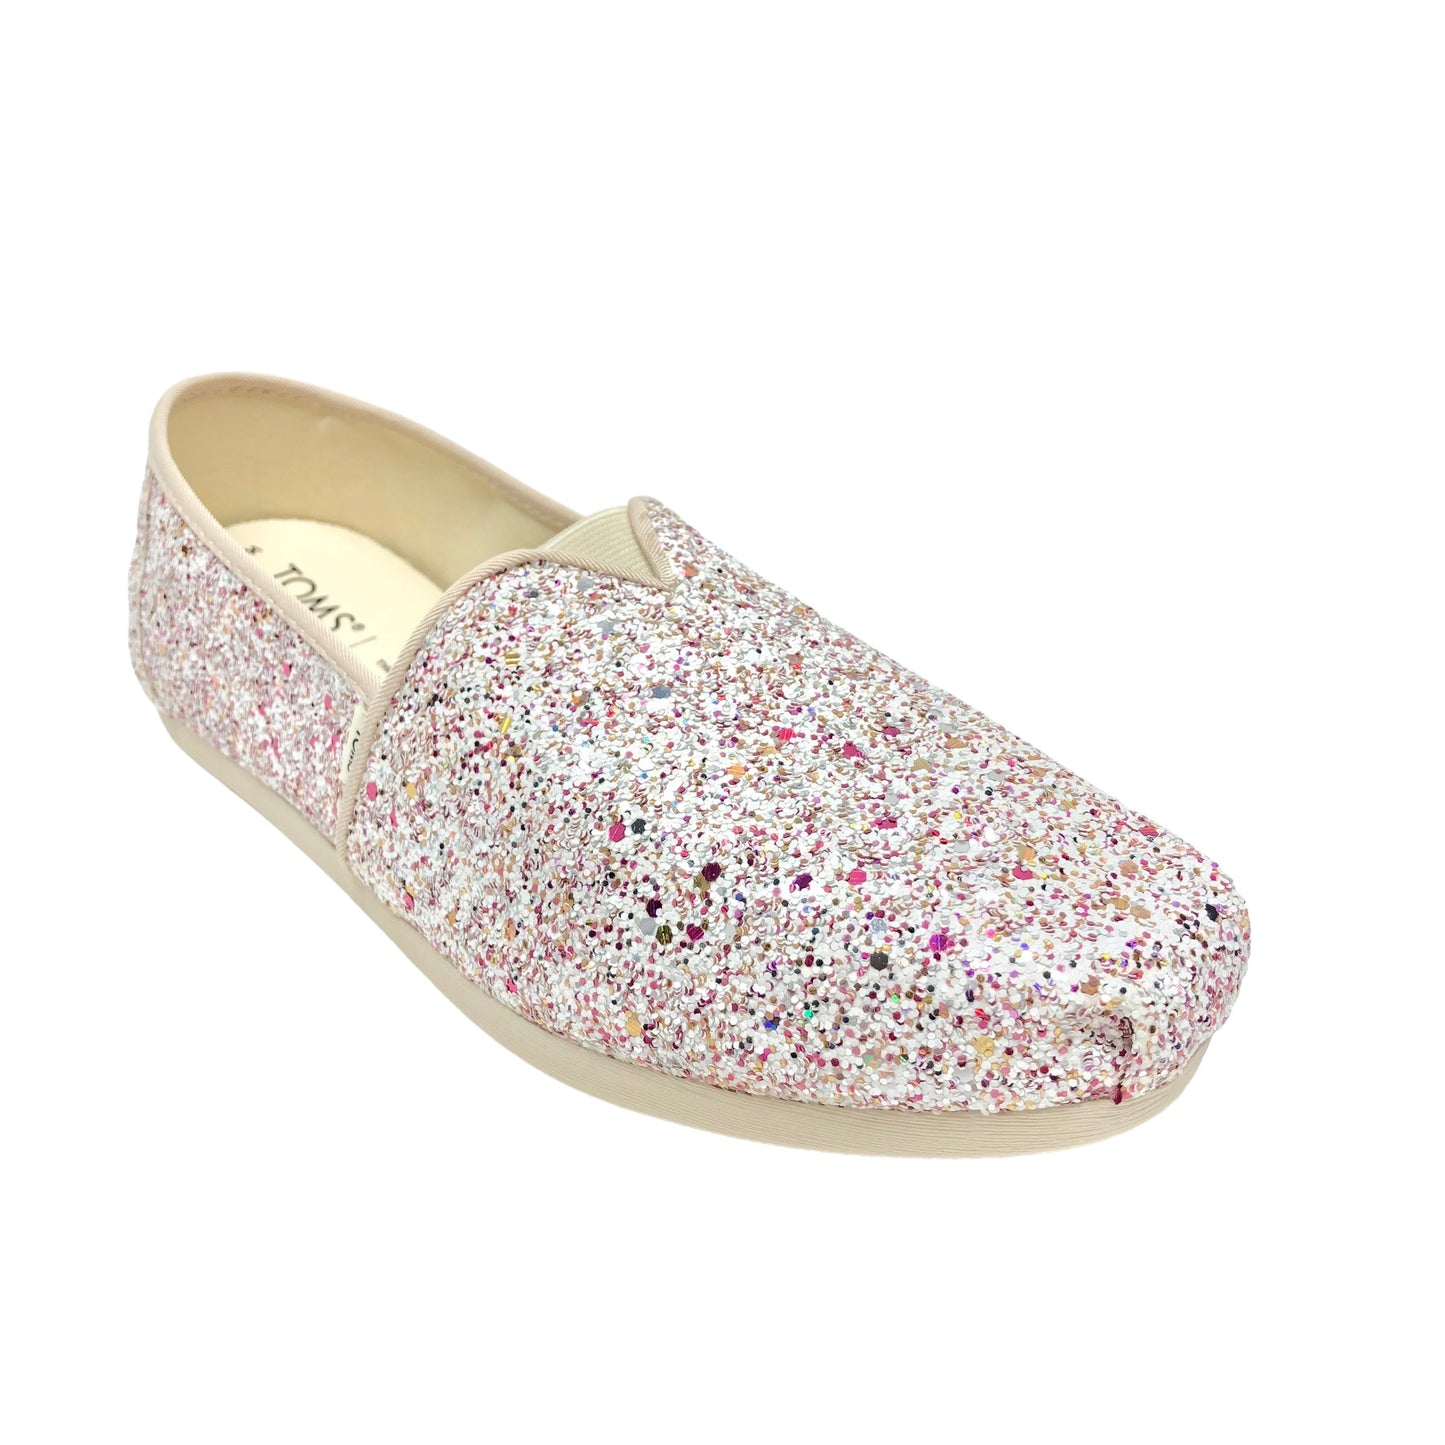 Pink & White Shoes Sneakers Toms, Size 8.5